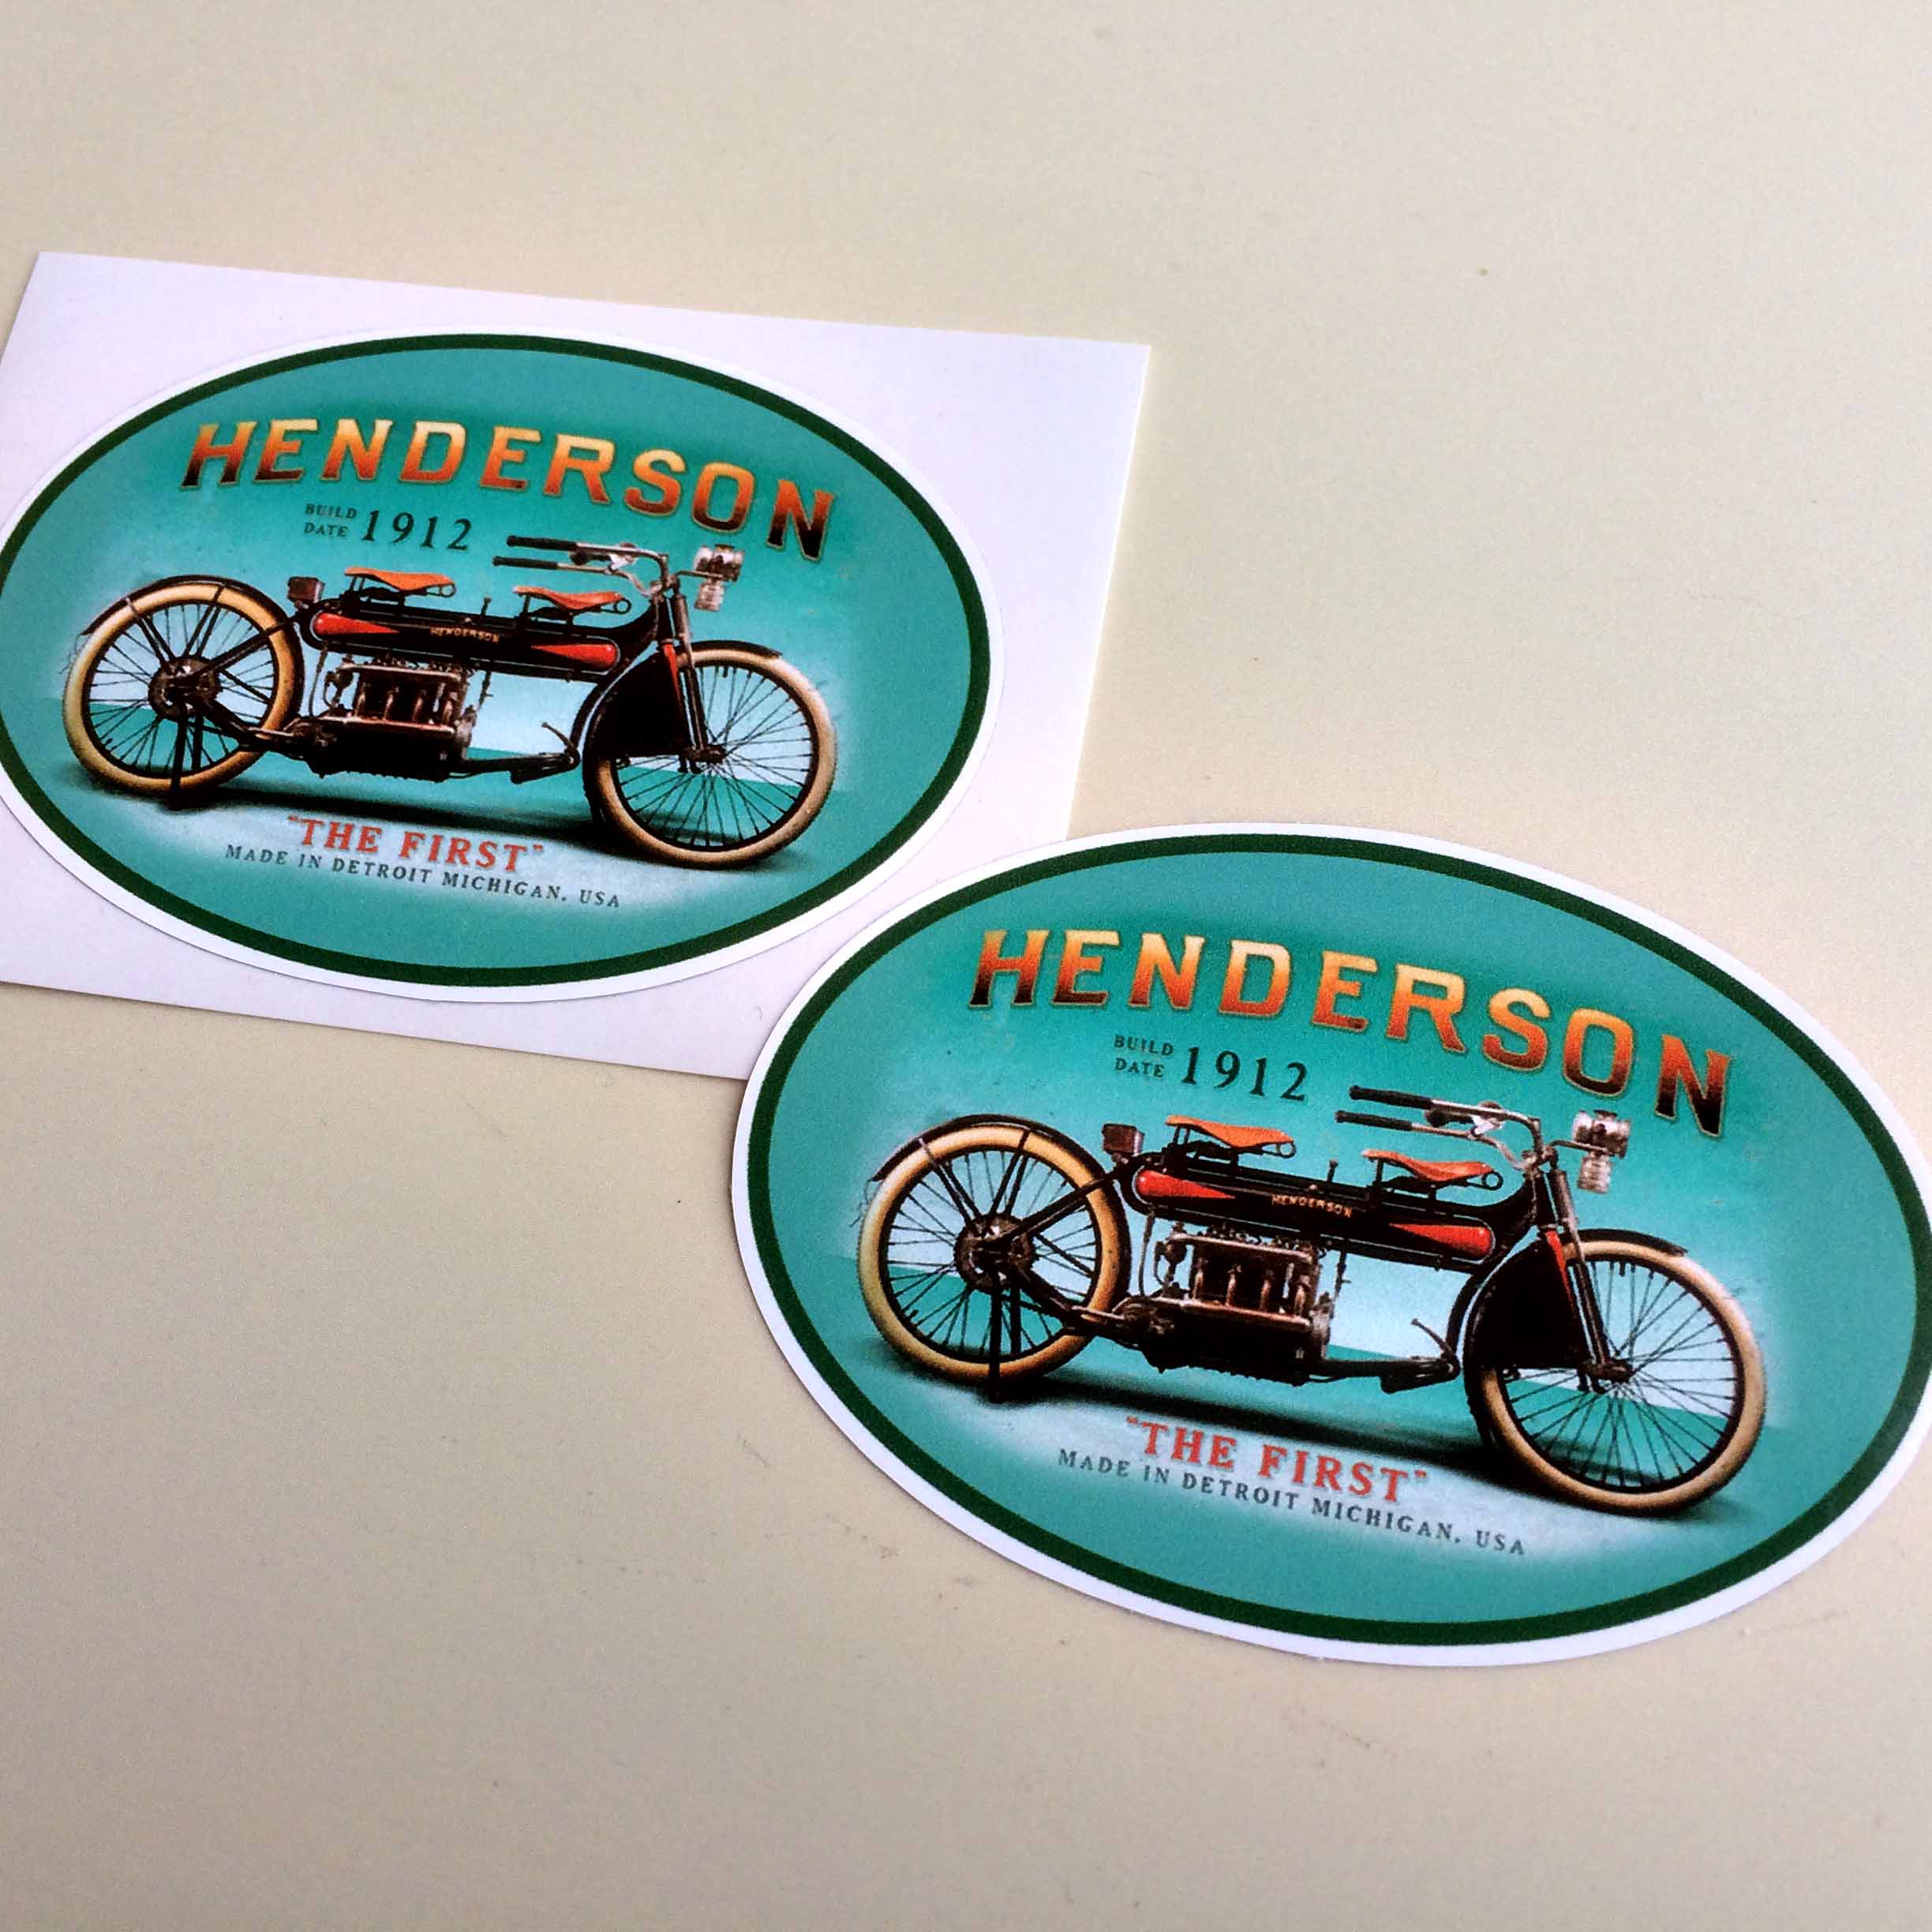 Henderson in gold and "The First" in red lettering surrounds a vintage motorcycle on a blue oval sticker. Additional text in black - Build Date 1912, Made in Detroit, Michigan, USA.